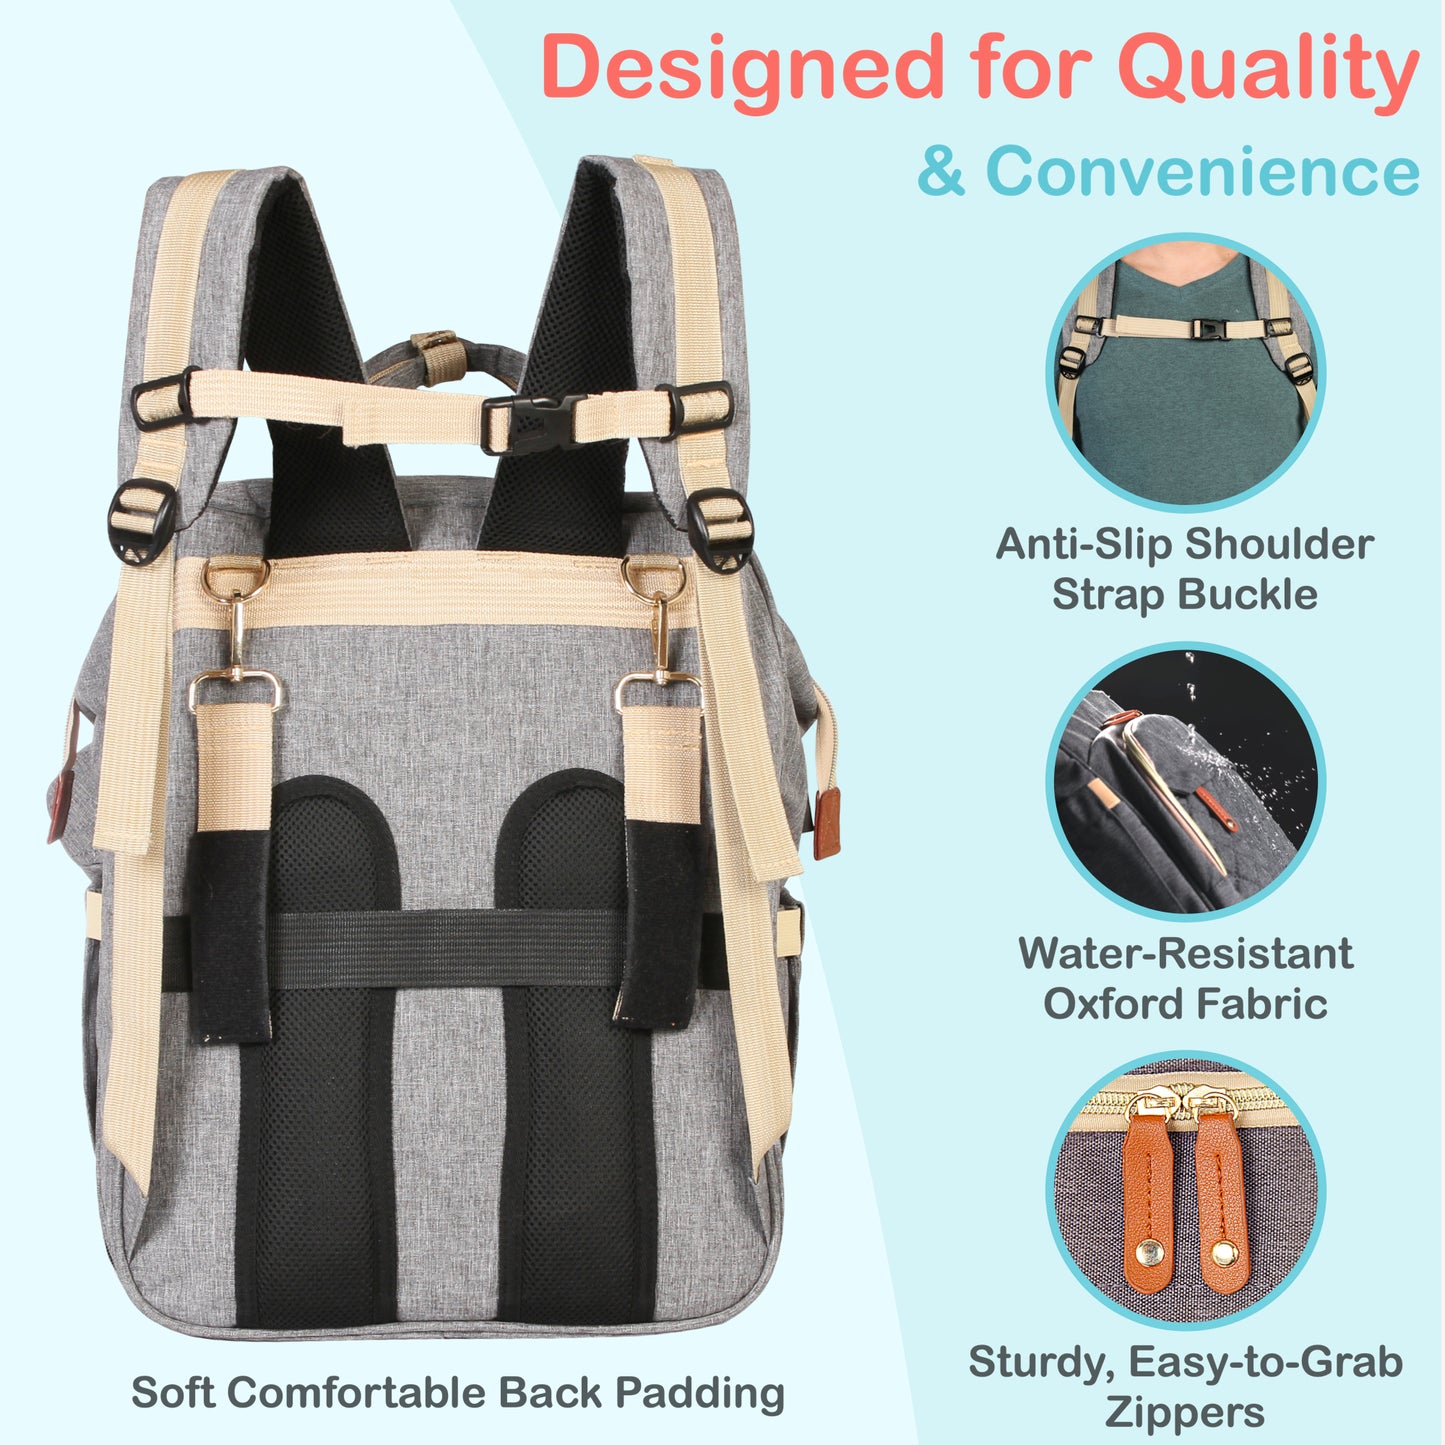 Designed for Quality & Convenience - Anti-slip Shoulder Strap Buckles, Water Resistant Oxford Fabric & Easy-to-Grab Leather Zipper Handles